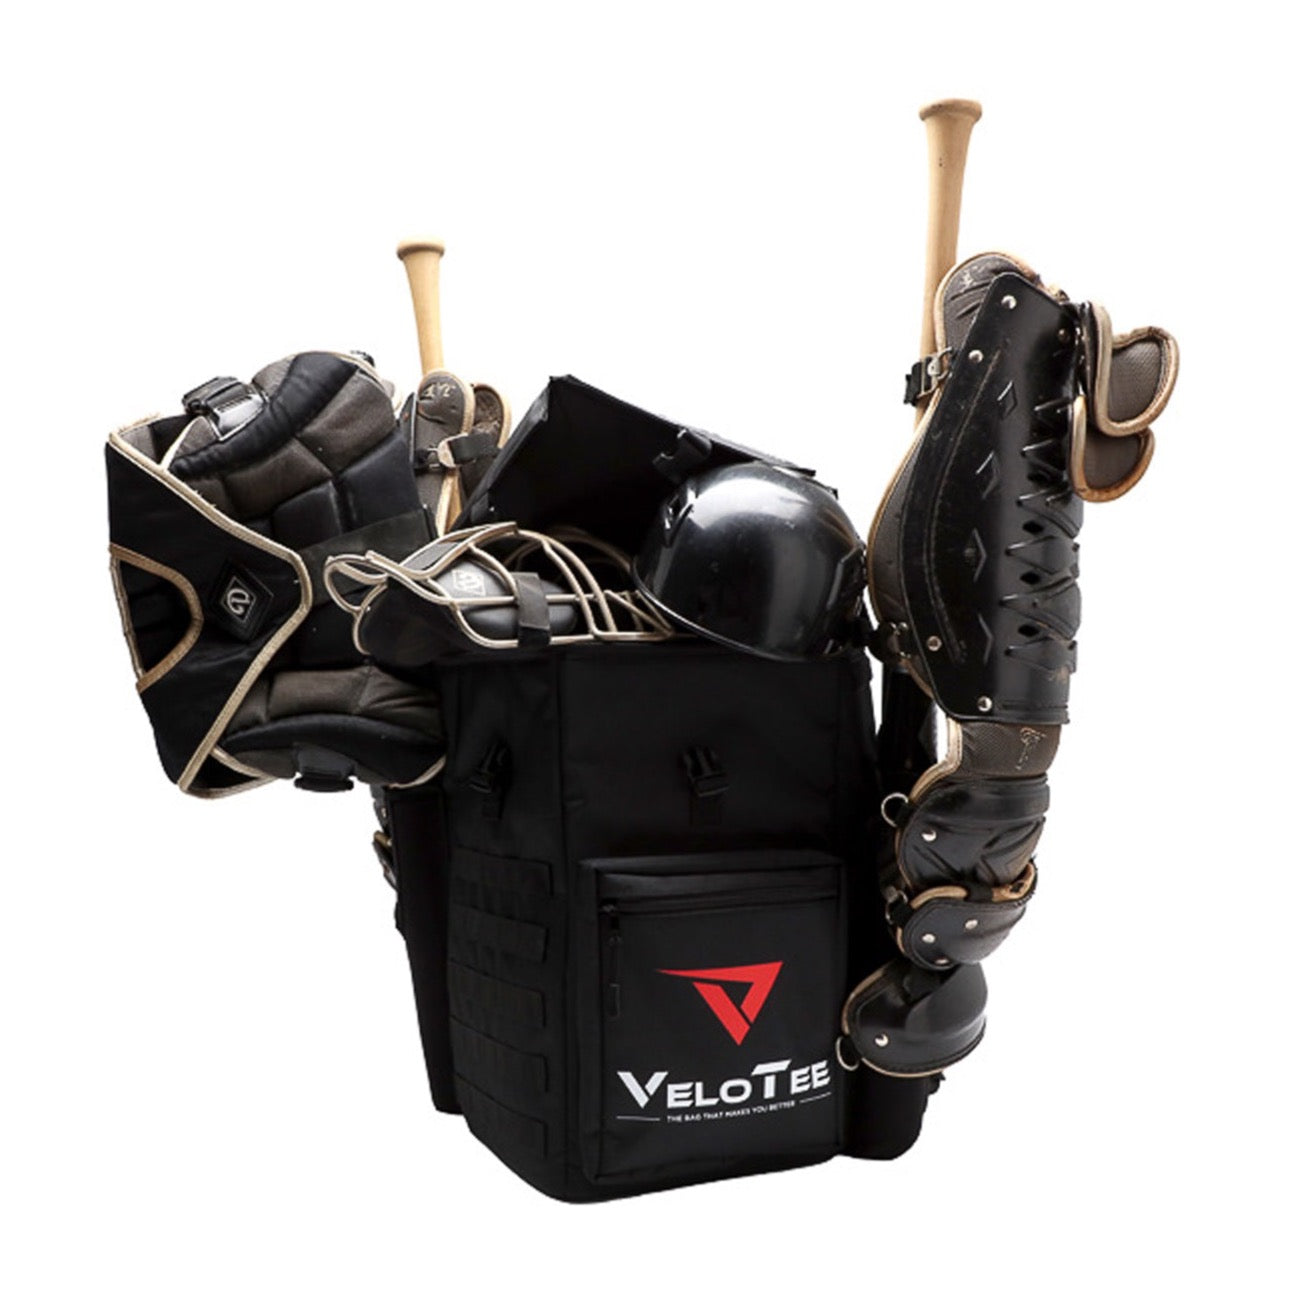 VeloTee's Baseball & Softball Bat Bag Backpack with Batting Tee lets baseball and softball catcher keep their catchers gear on their VeloTee. 